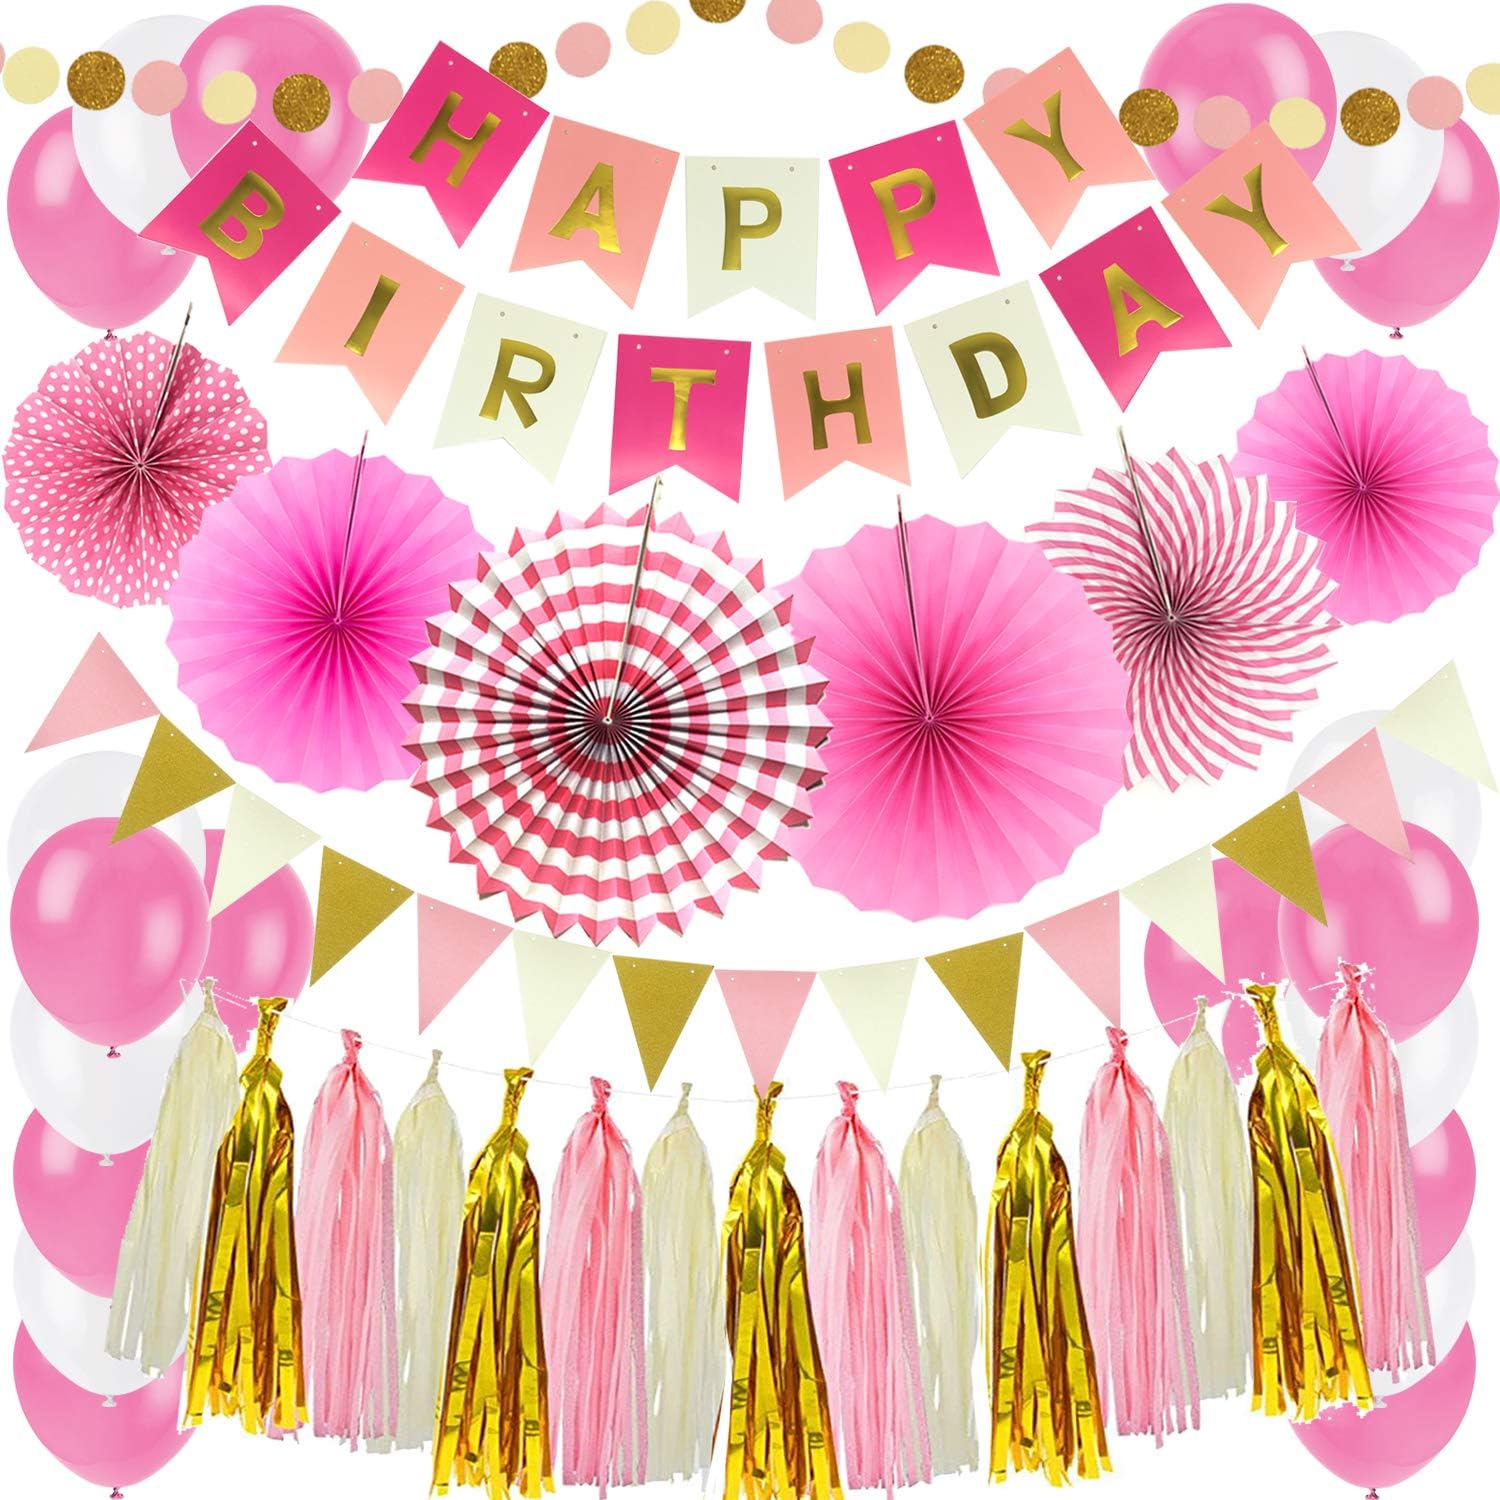 ZERODECO Birthday Party Decoration, Pink Happy Birthday Banner with Paper Fans Garland String Triangle Bunting Flag Tissue Tassel and Balloon for Bday Party Supplies Anniversary Decoration